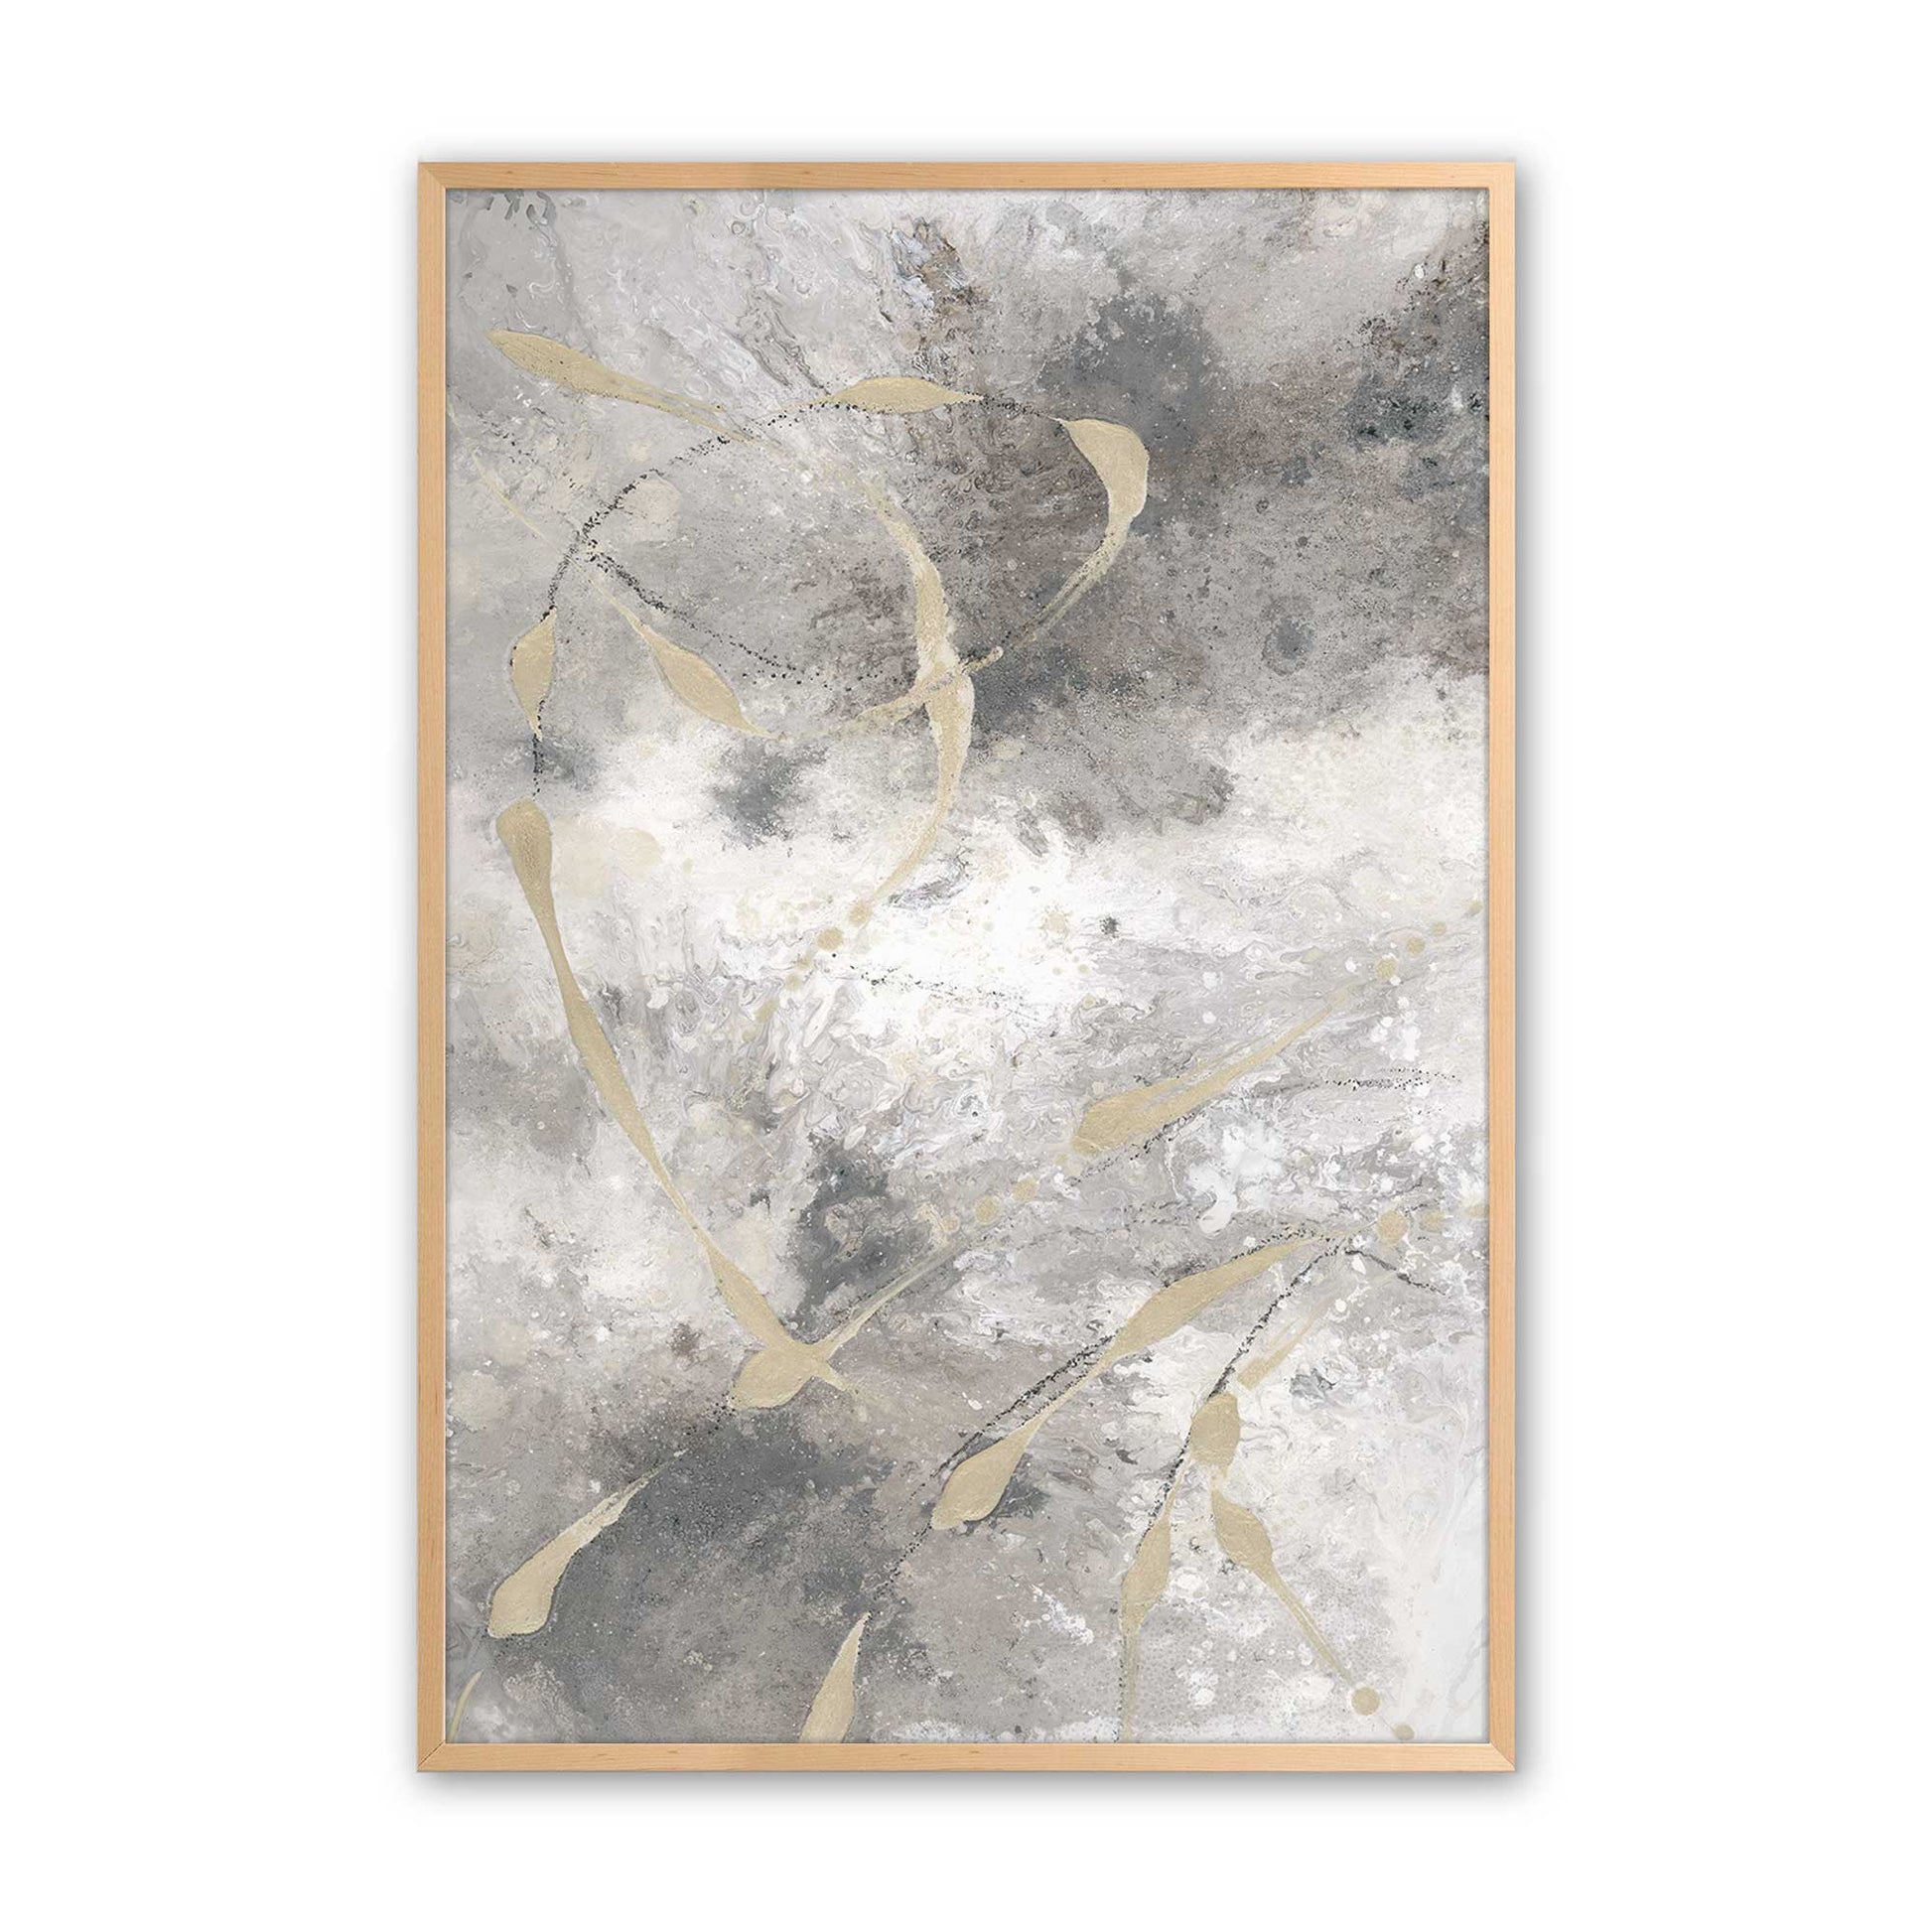 [Color:Raw Maple], Picture of art in a Raw Maple frame